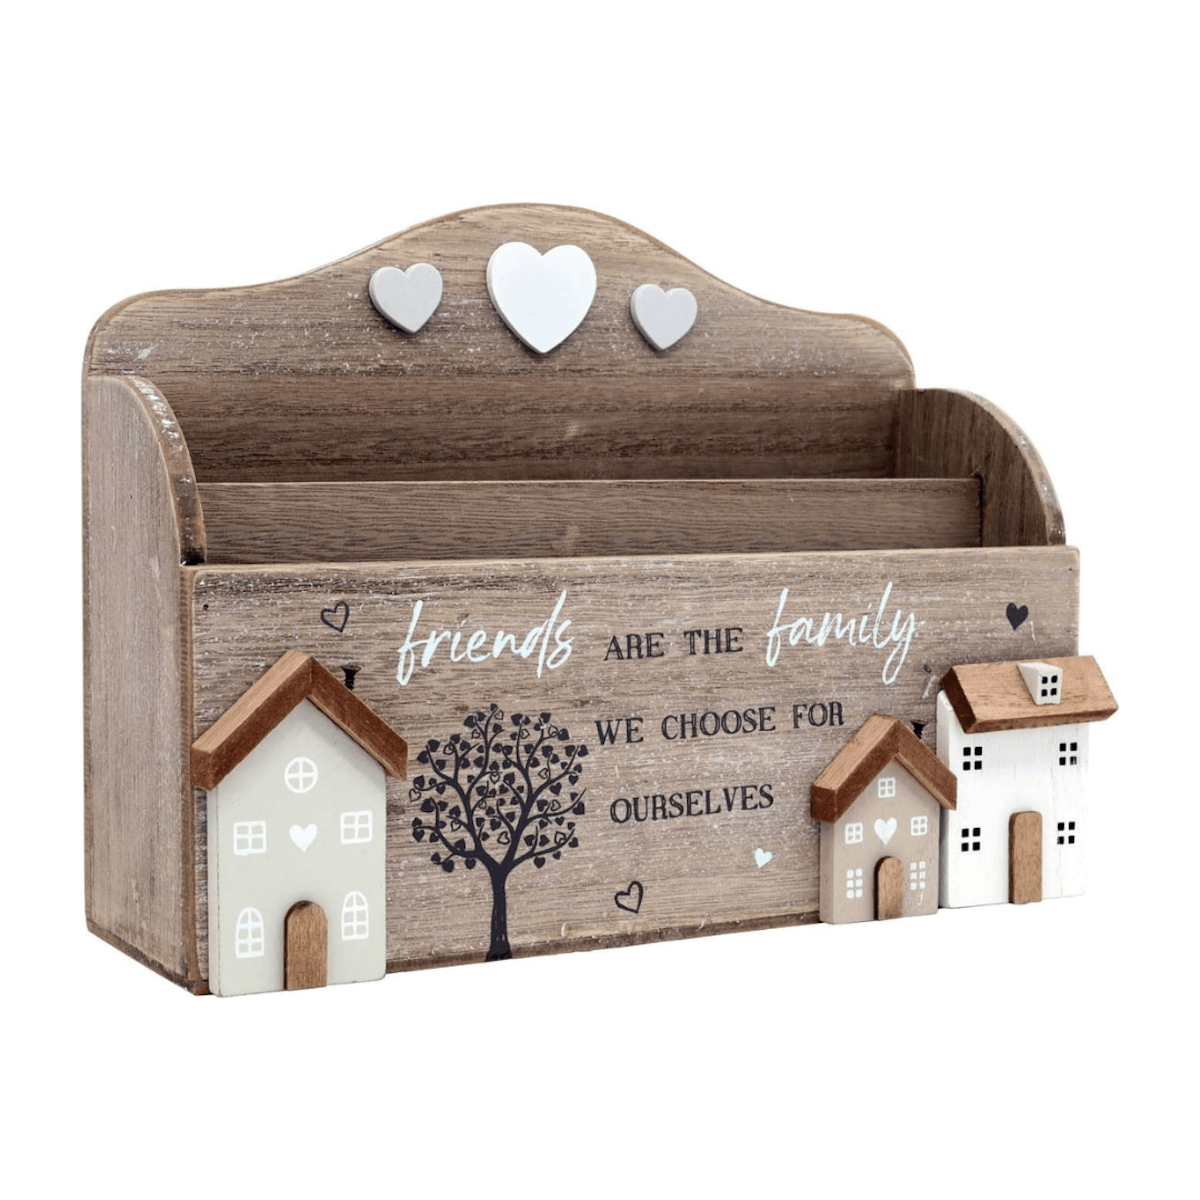 Sifcon International Home accessories Wooden Heart and Home Design Letter Holder